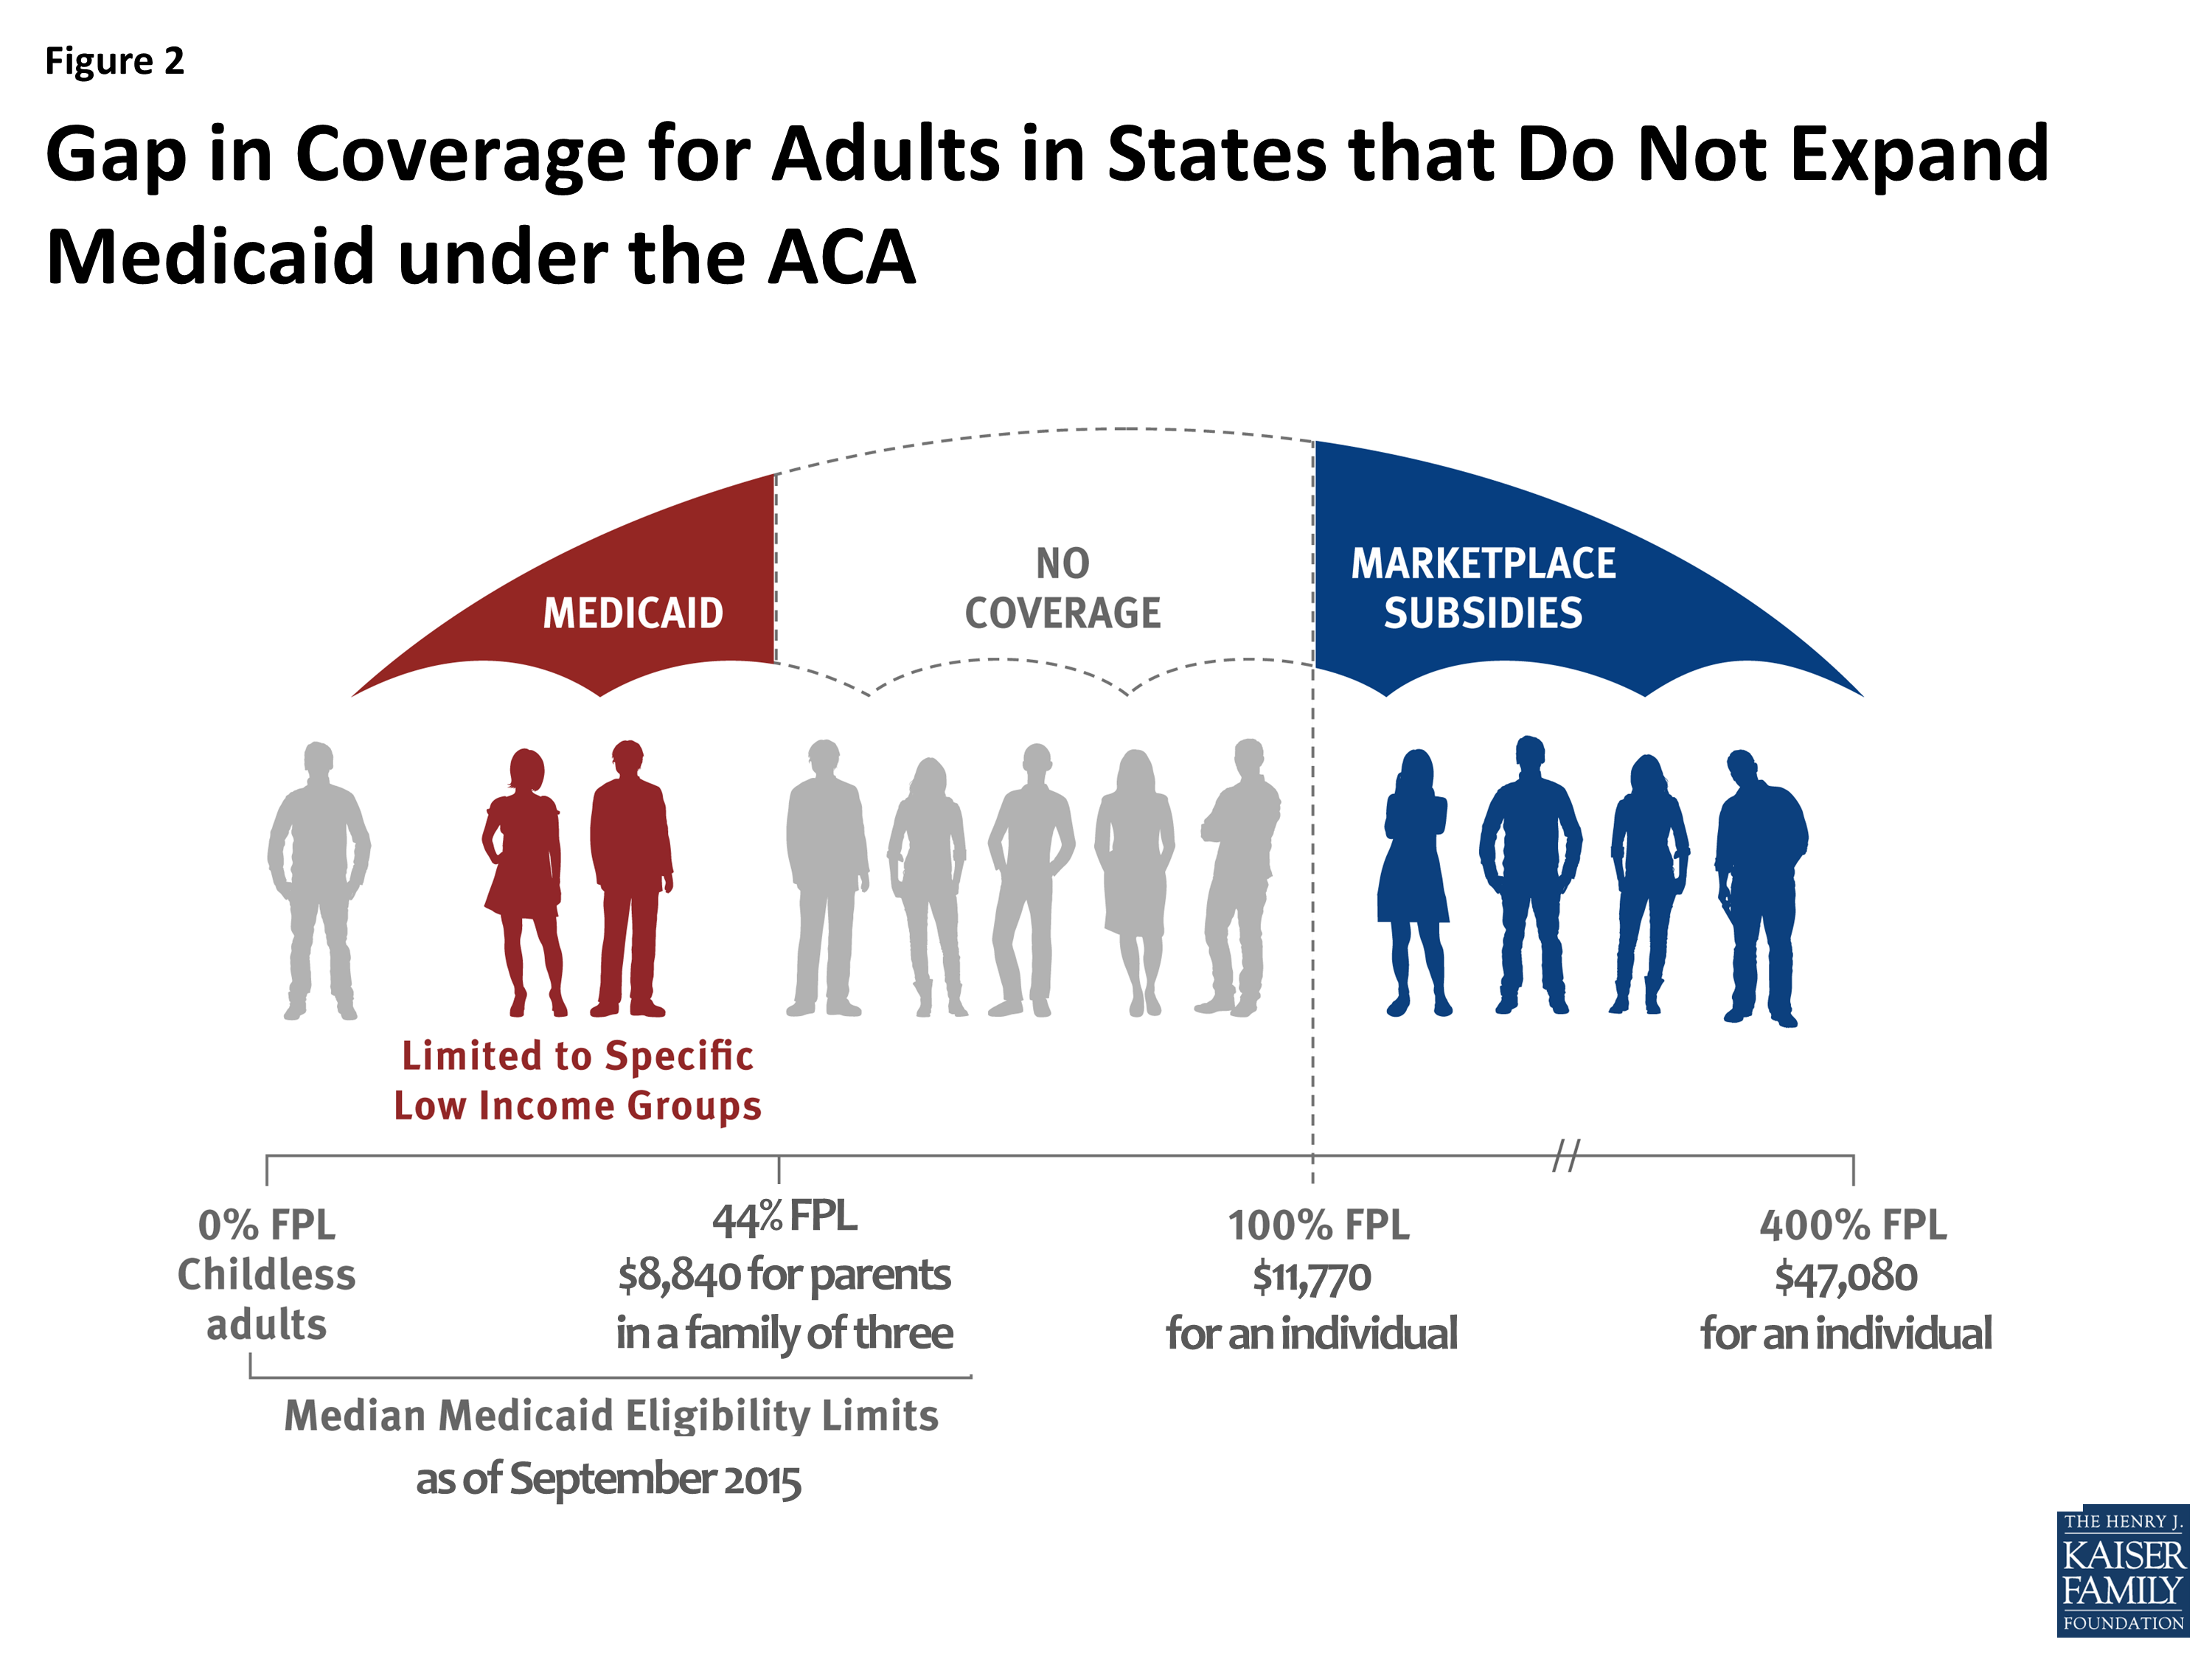 The Impact Of The Coverage Gap For Adults In States Not Expanding